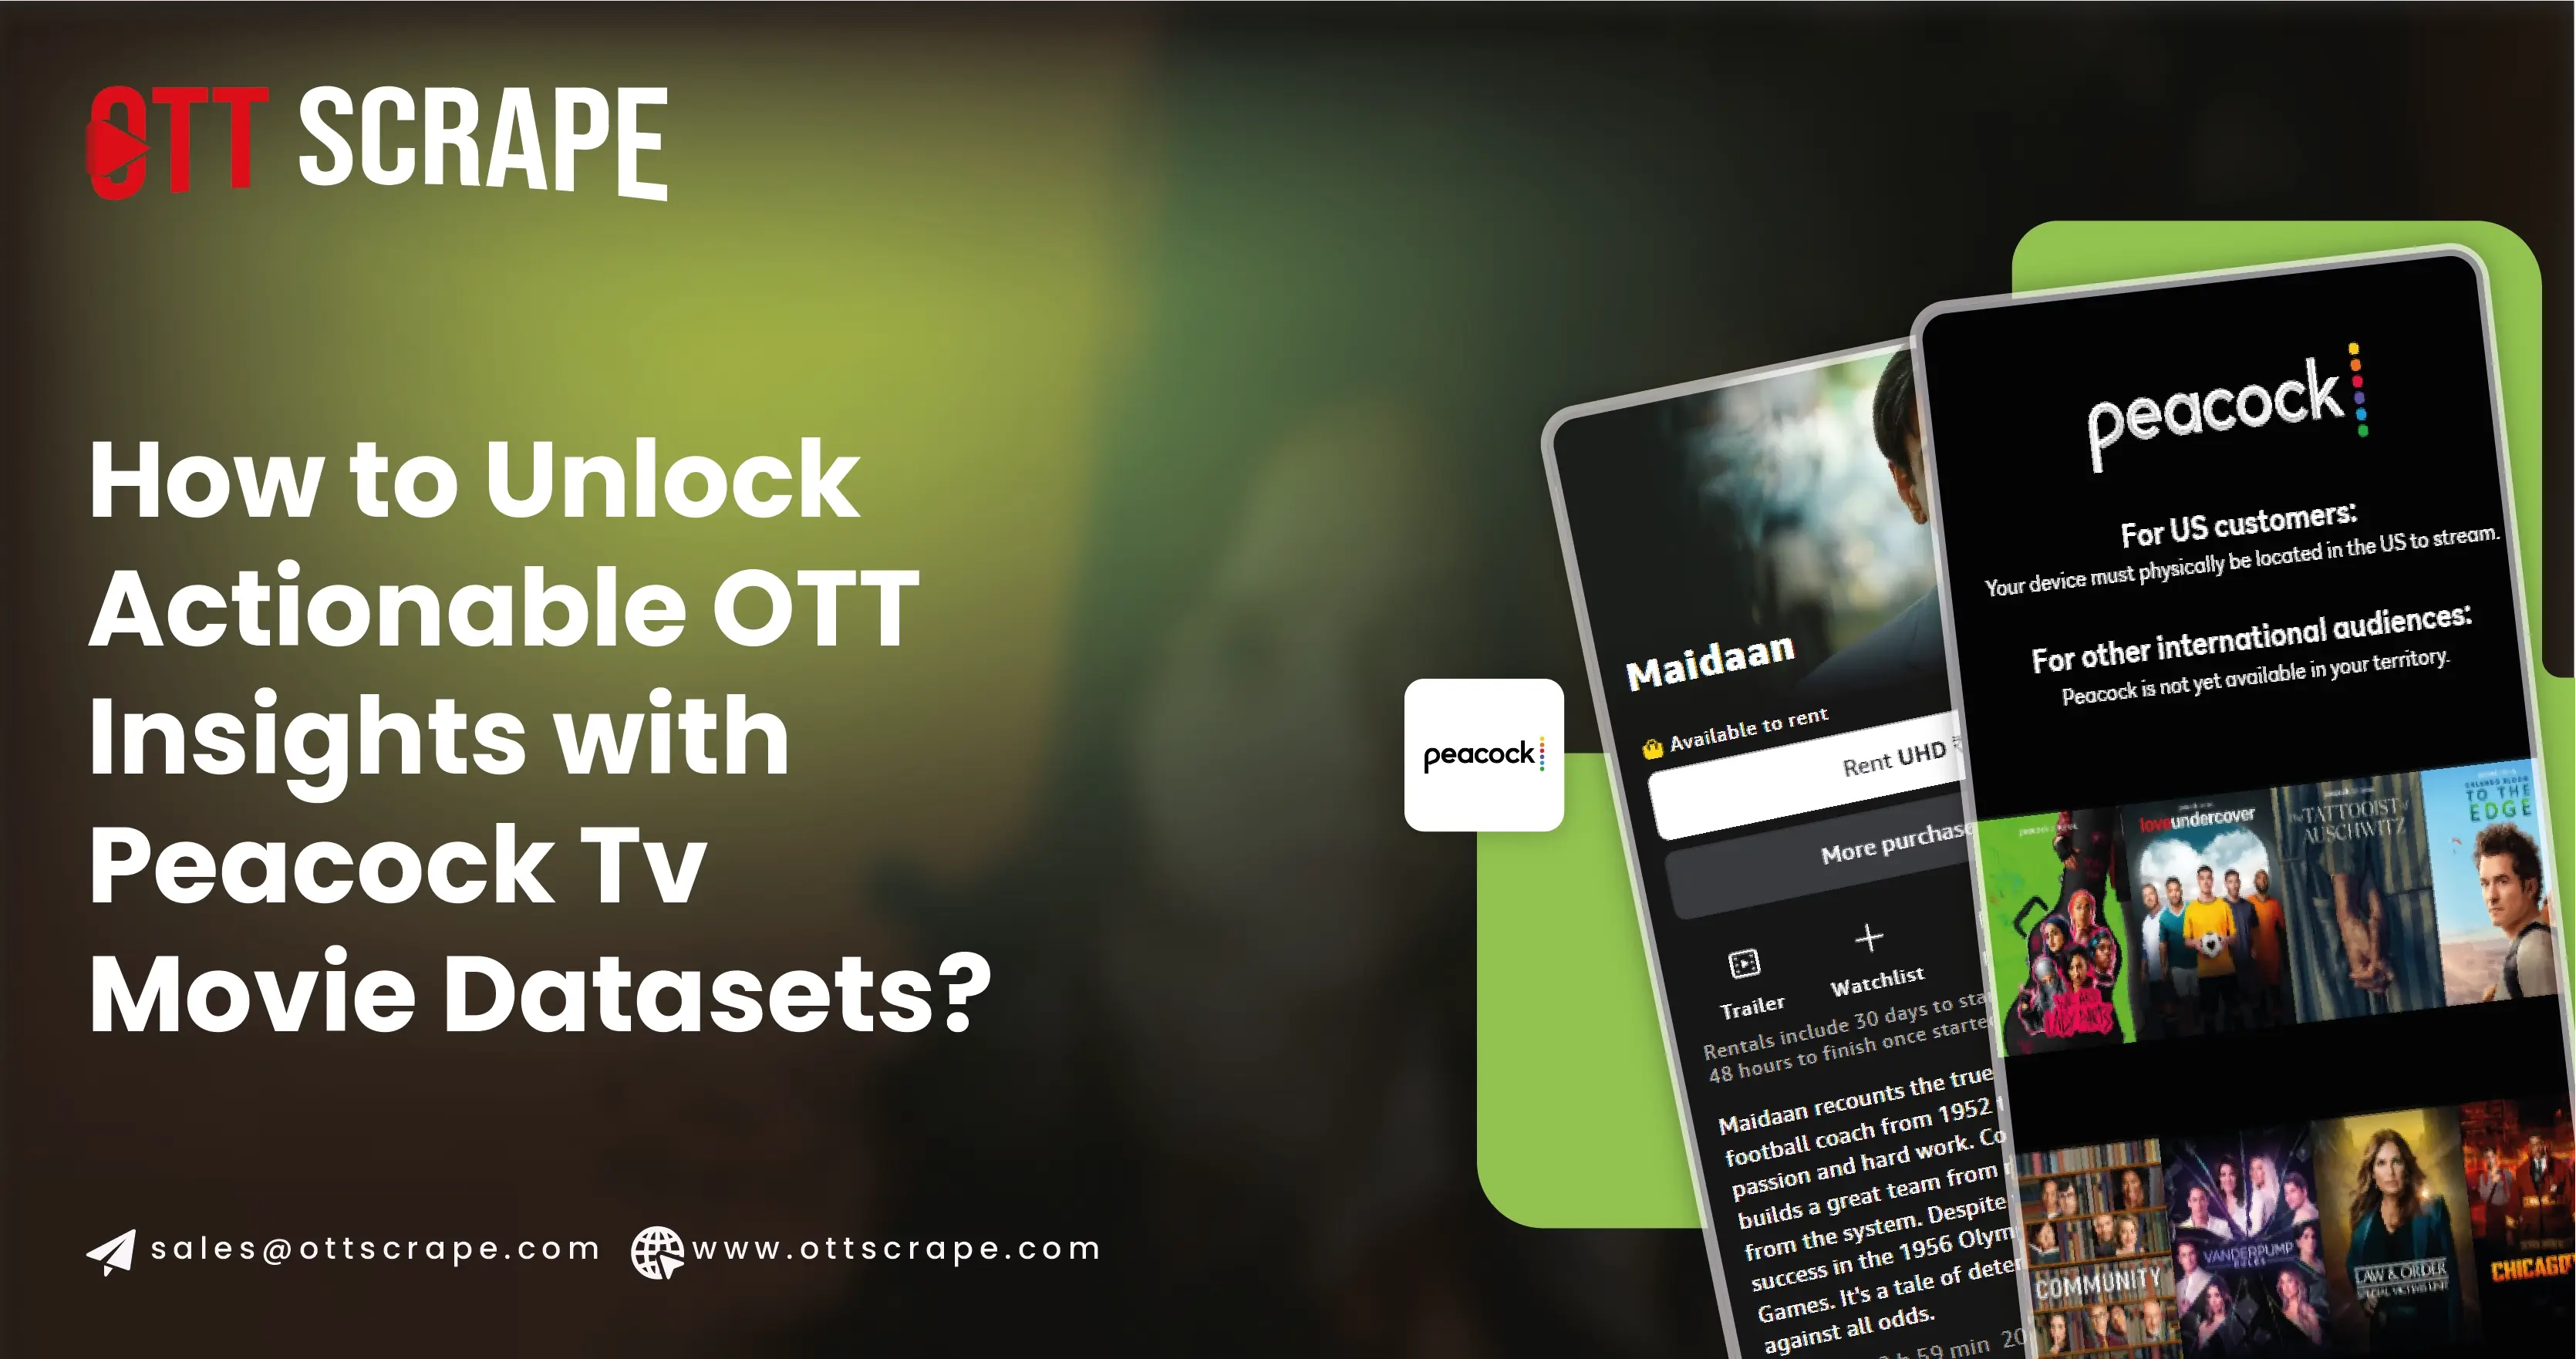 How-to-Unlock-Actionable-OTT-Insights-with-Peacock-Movie-Datasets-01